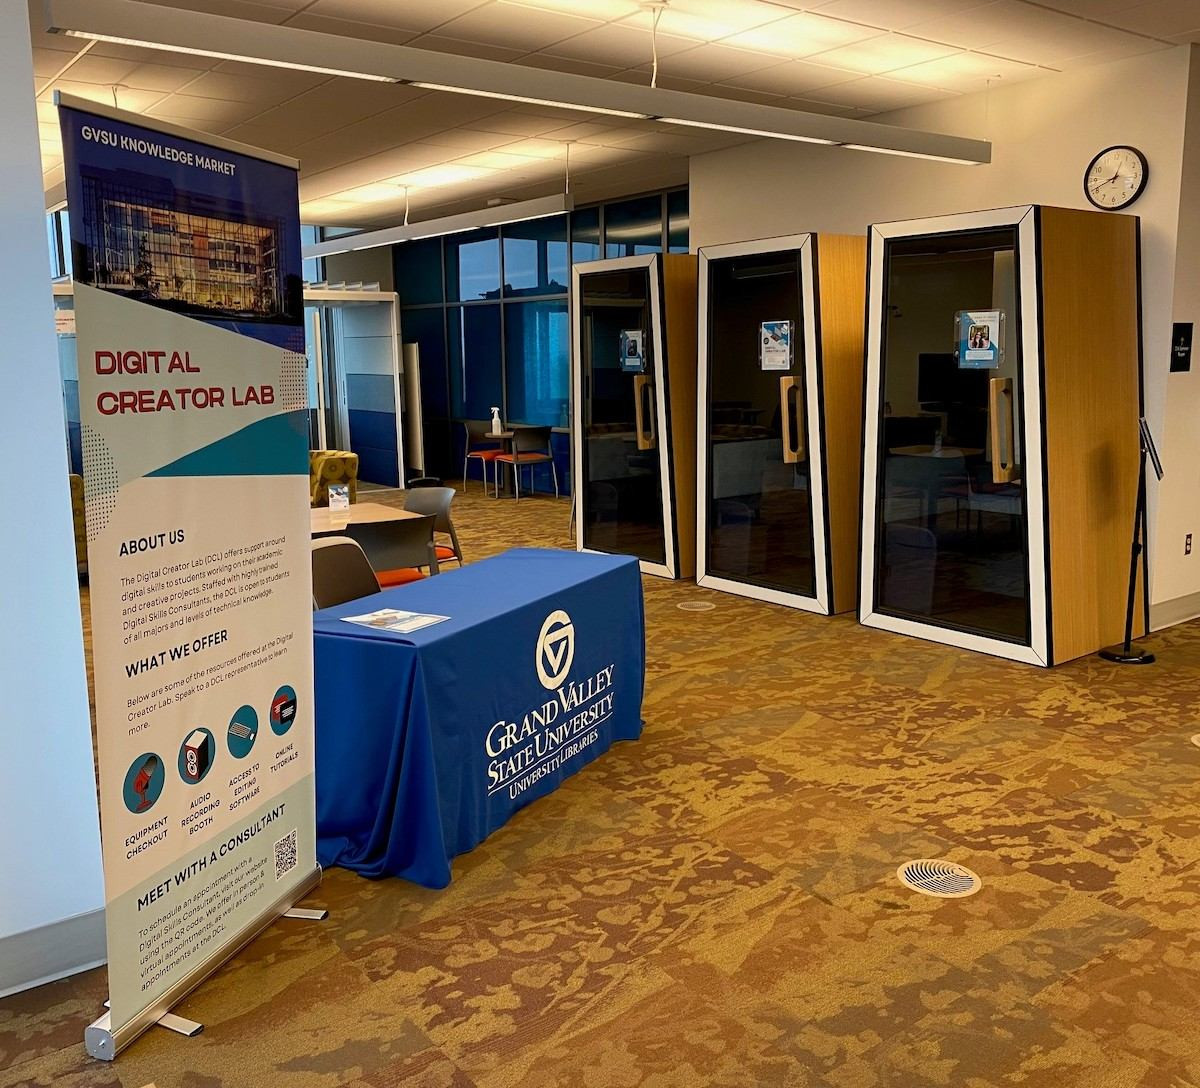 Signage that reads Digital Creator Lab set next to a table with a blue GVSU branded table cloth on it inside the Digital Creator Lab in the Mary Idema Pew Library.